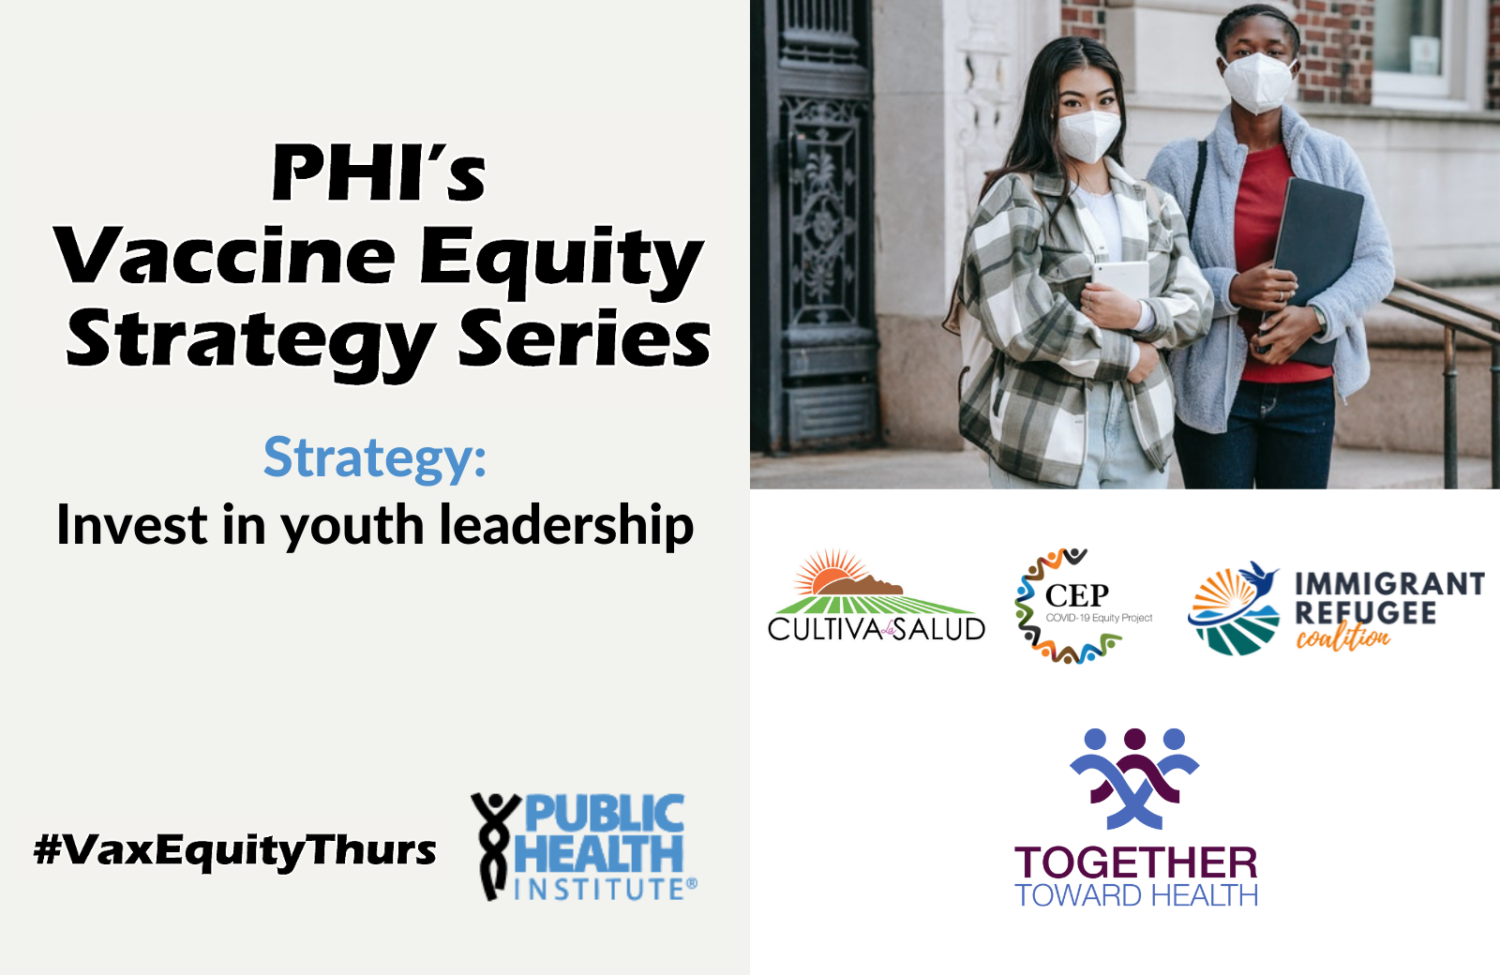 PHI's Vaccine Equity Strategy Series: Invest in youth leadership